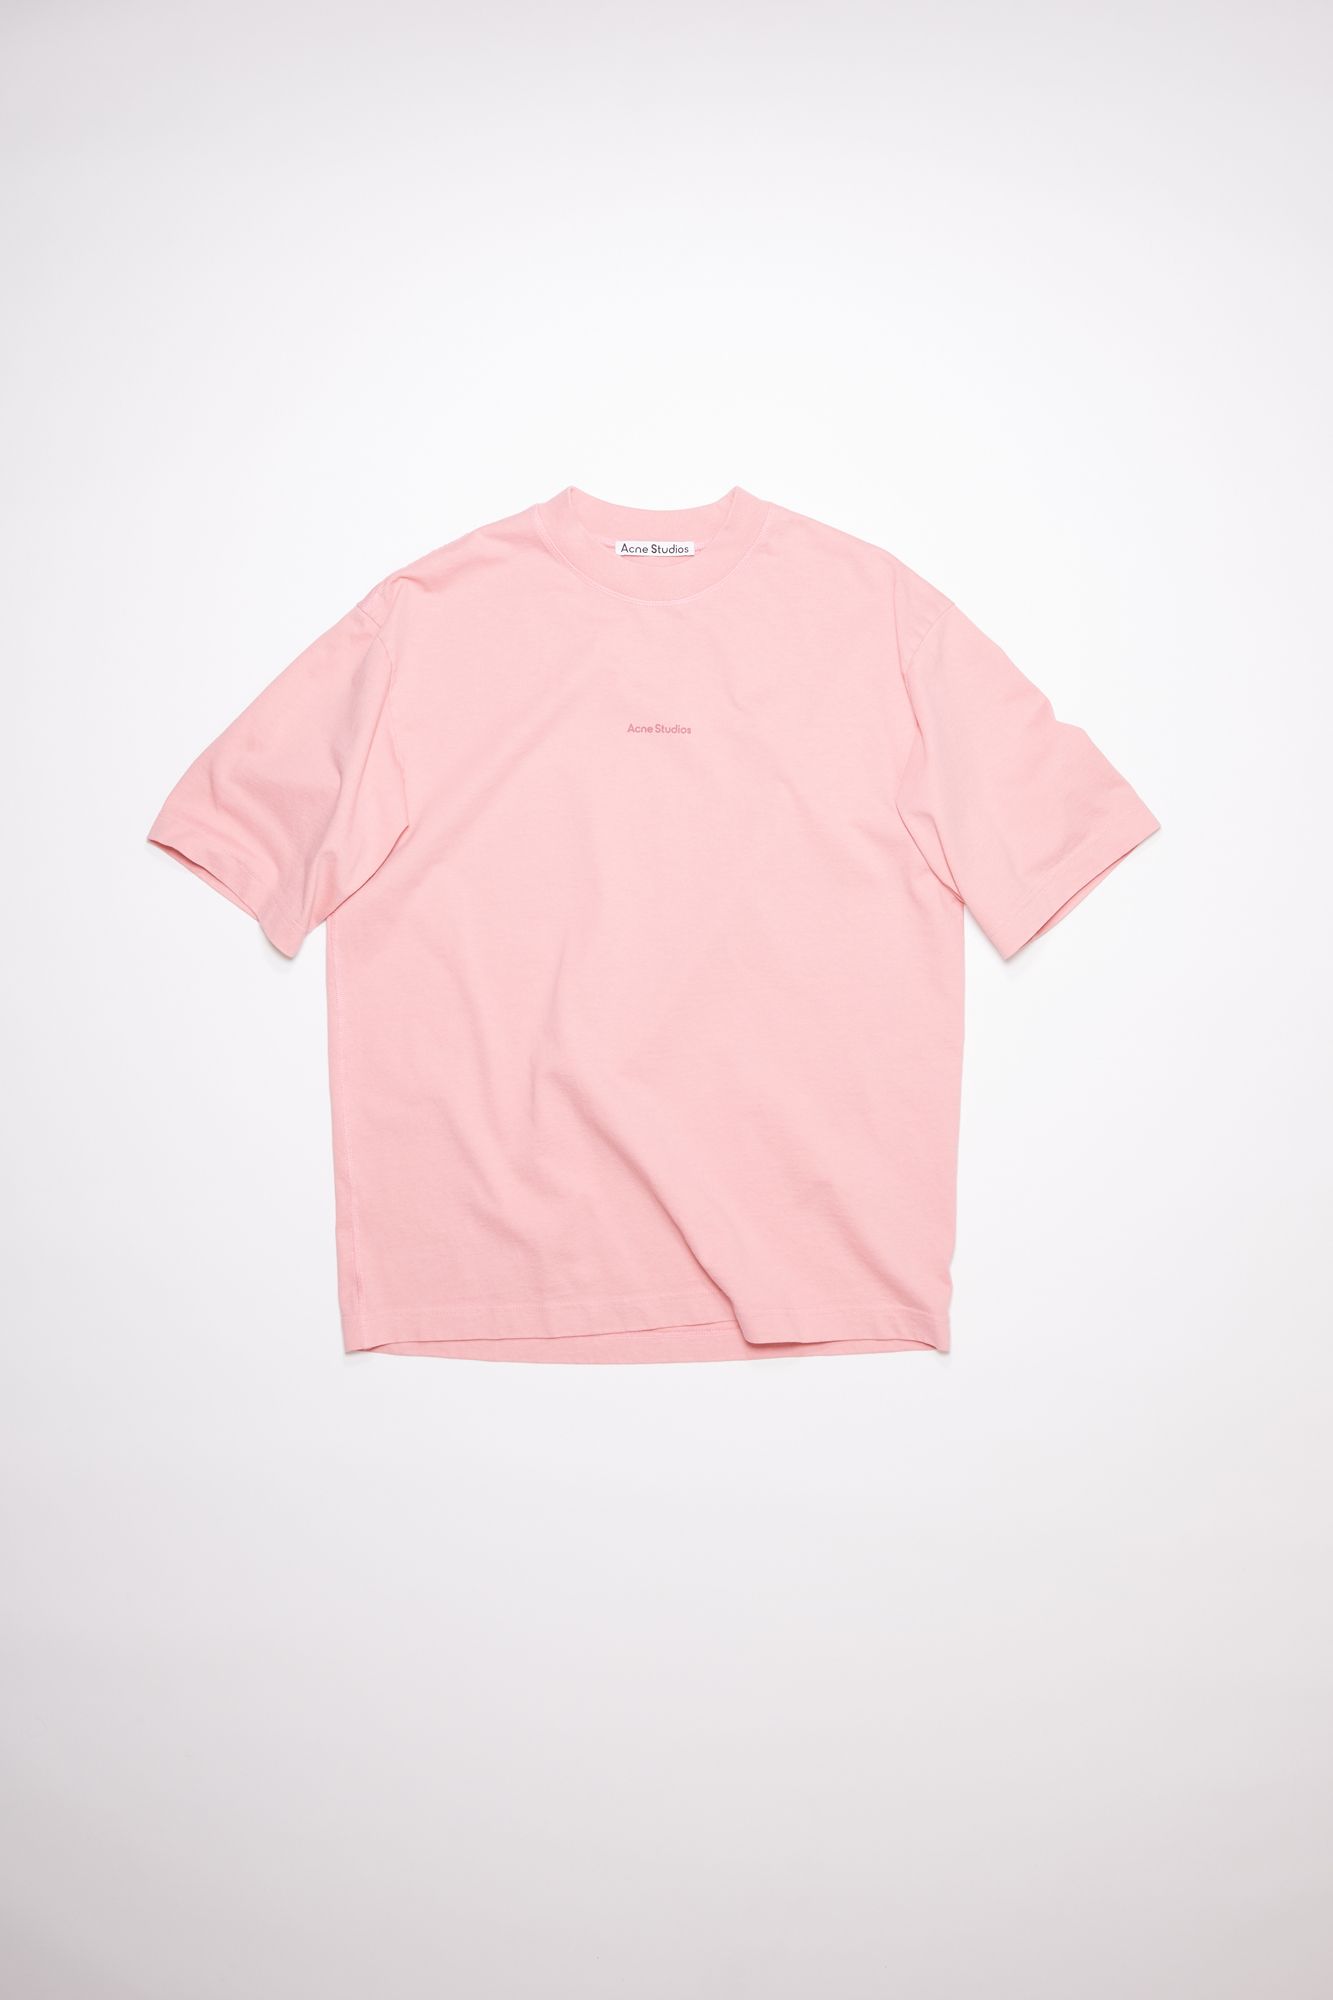 Acne Studios】2022 SPRING/SUMMER COLLECTION - 2nd DELIVERY 